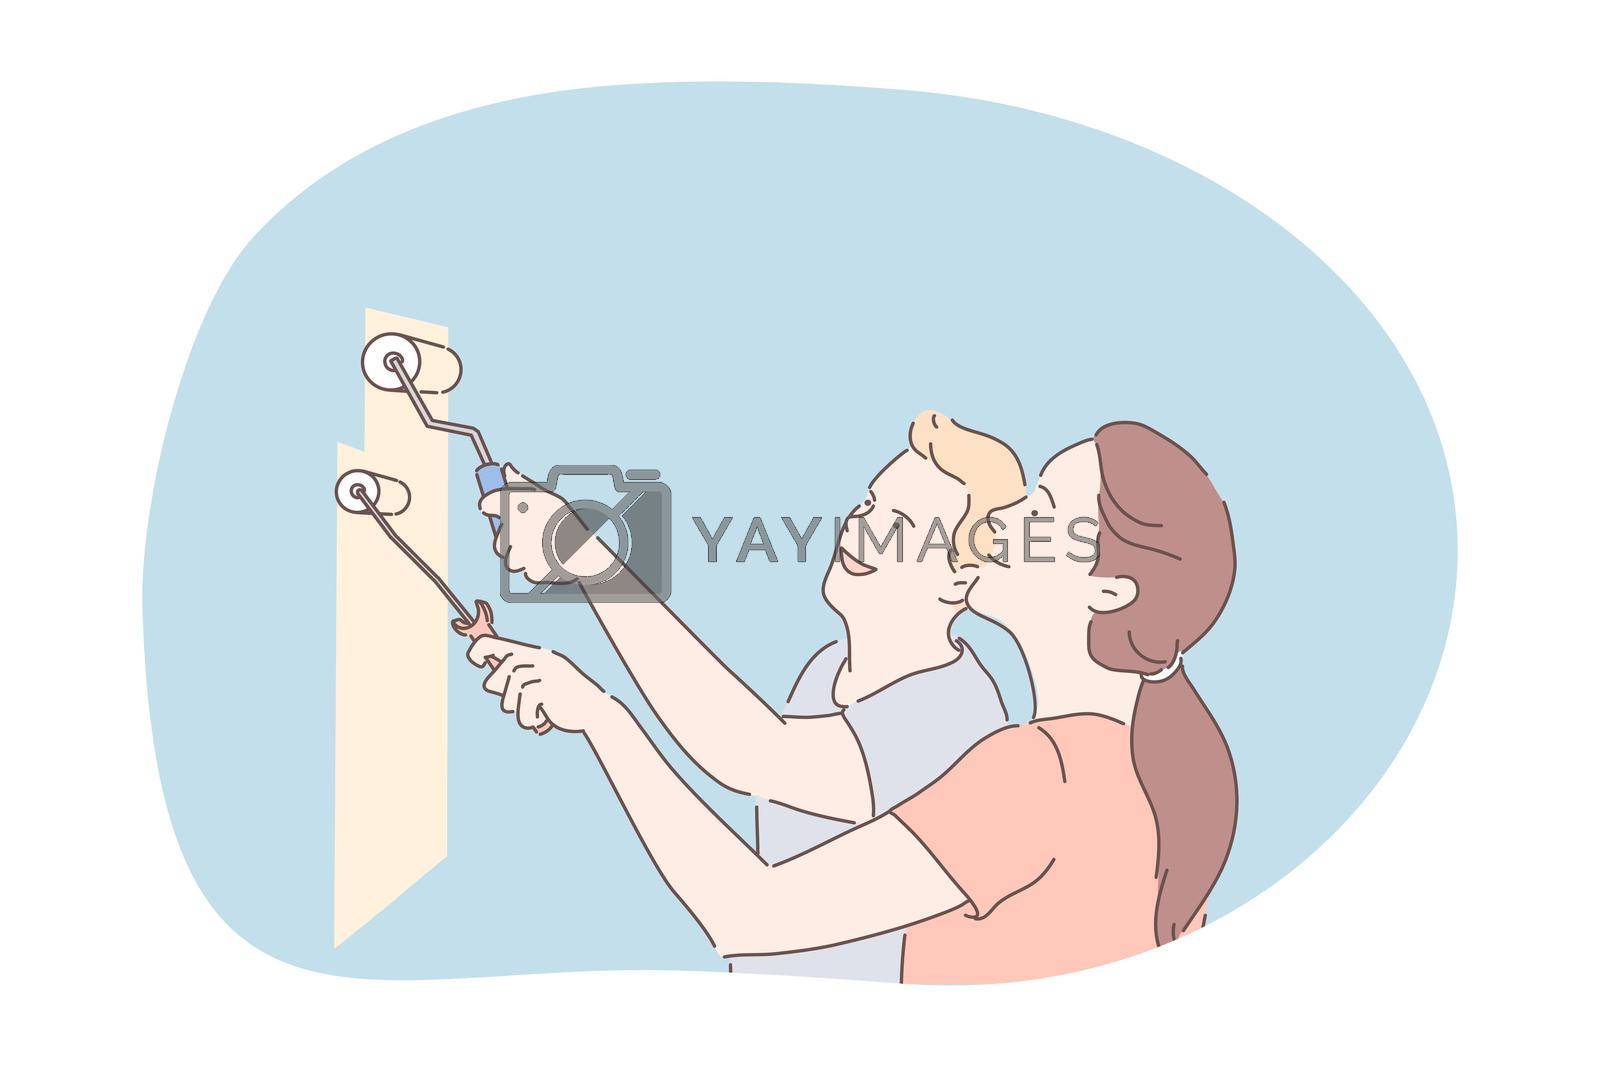 Renovation, decorating interior, colouring walls concept. Happy young couple cartoon characters standing and colouring wall with paintbrushes into pastel beige color together during construction works